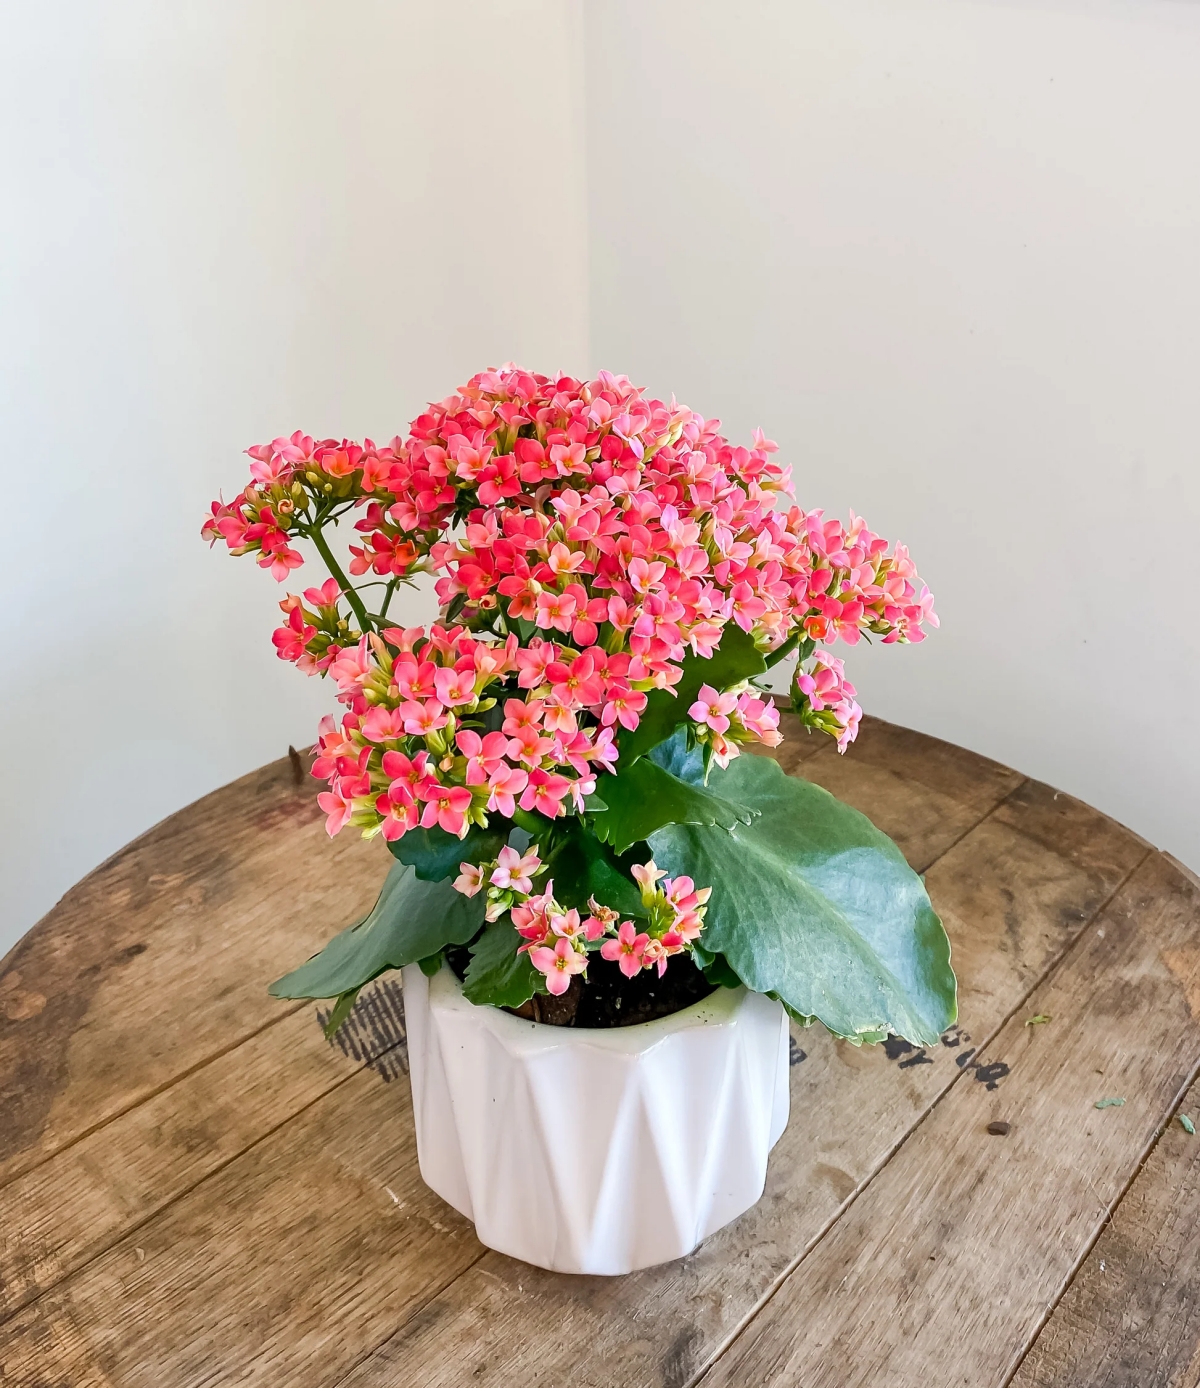 Kalanchoe Care 101: How to Care For This Lovely Indoor Plant